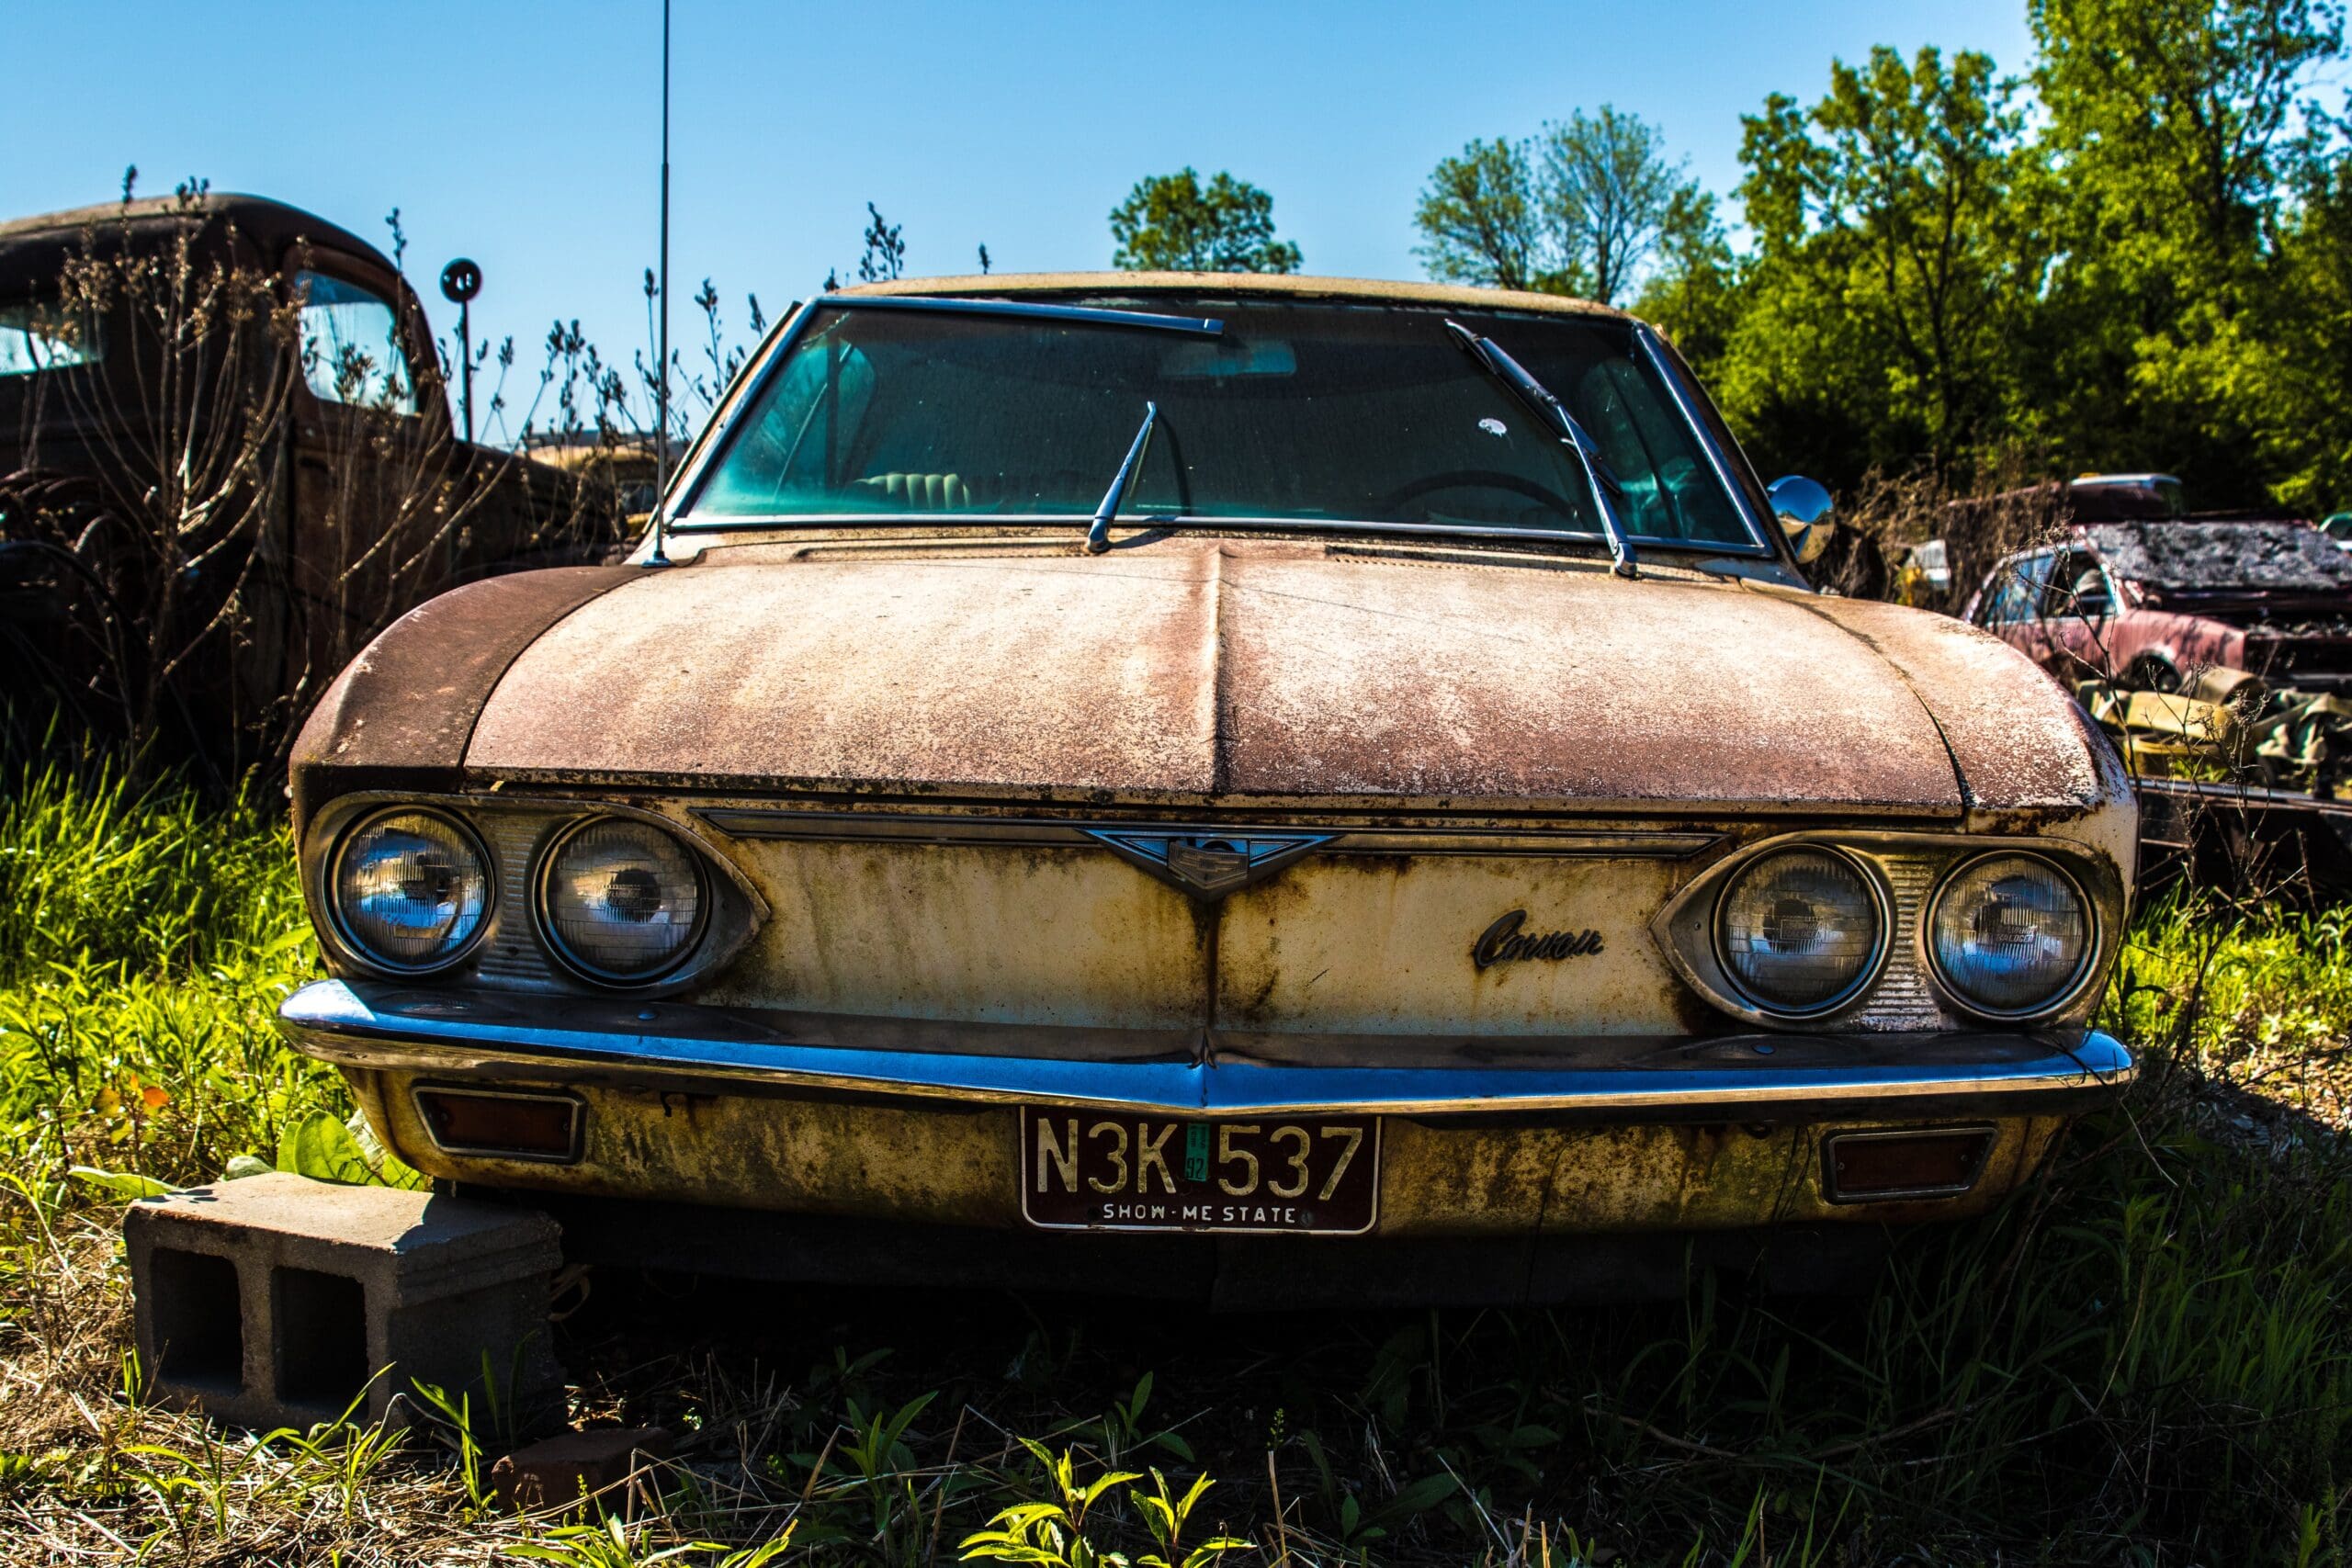 Selling your junk car